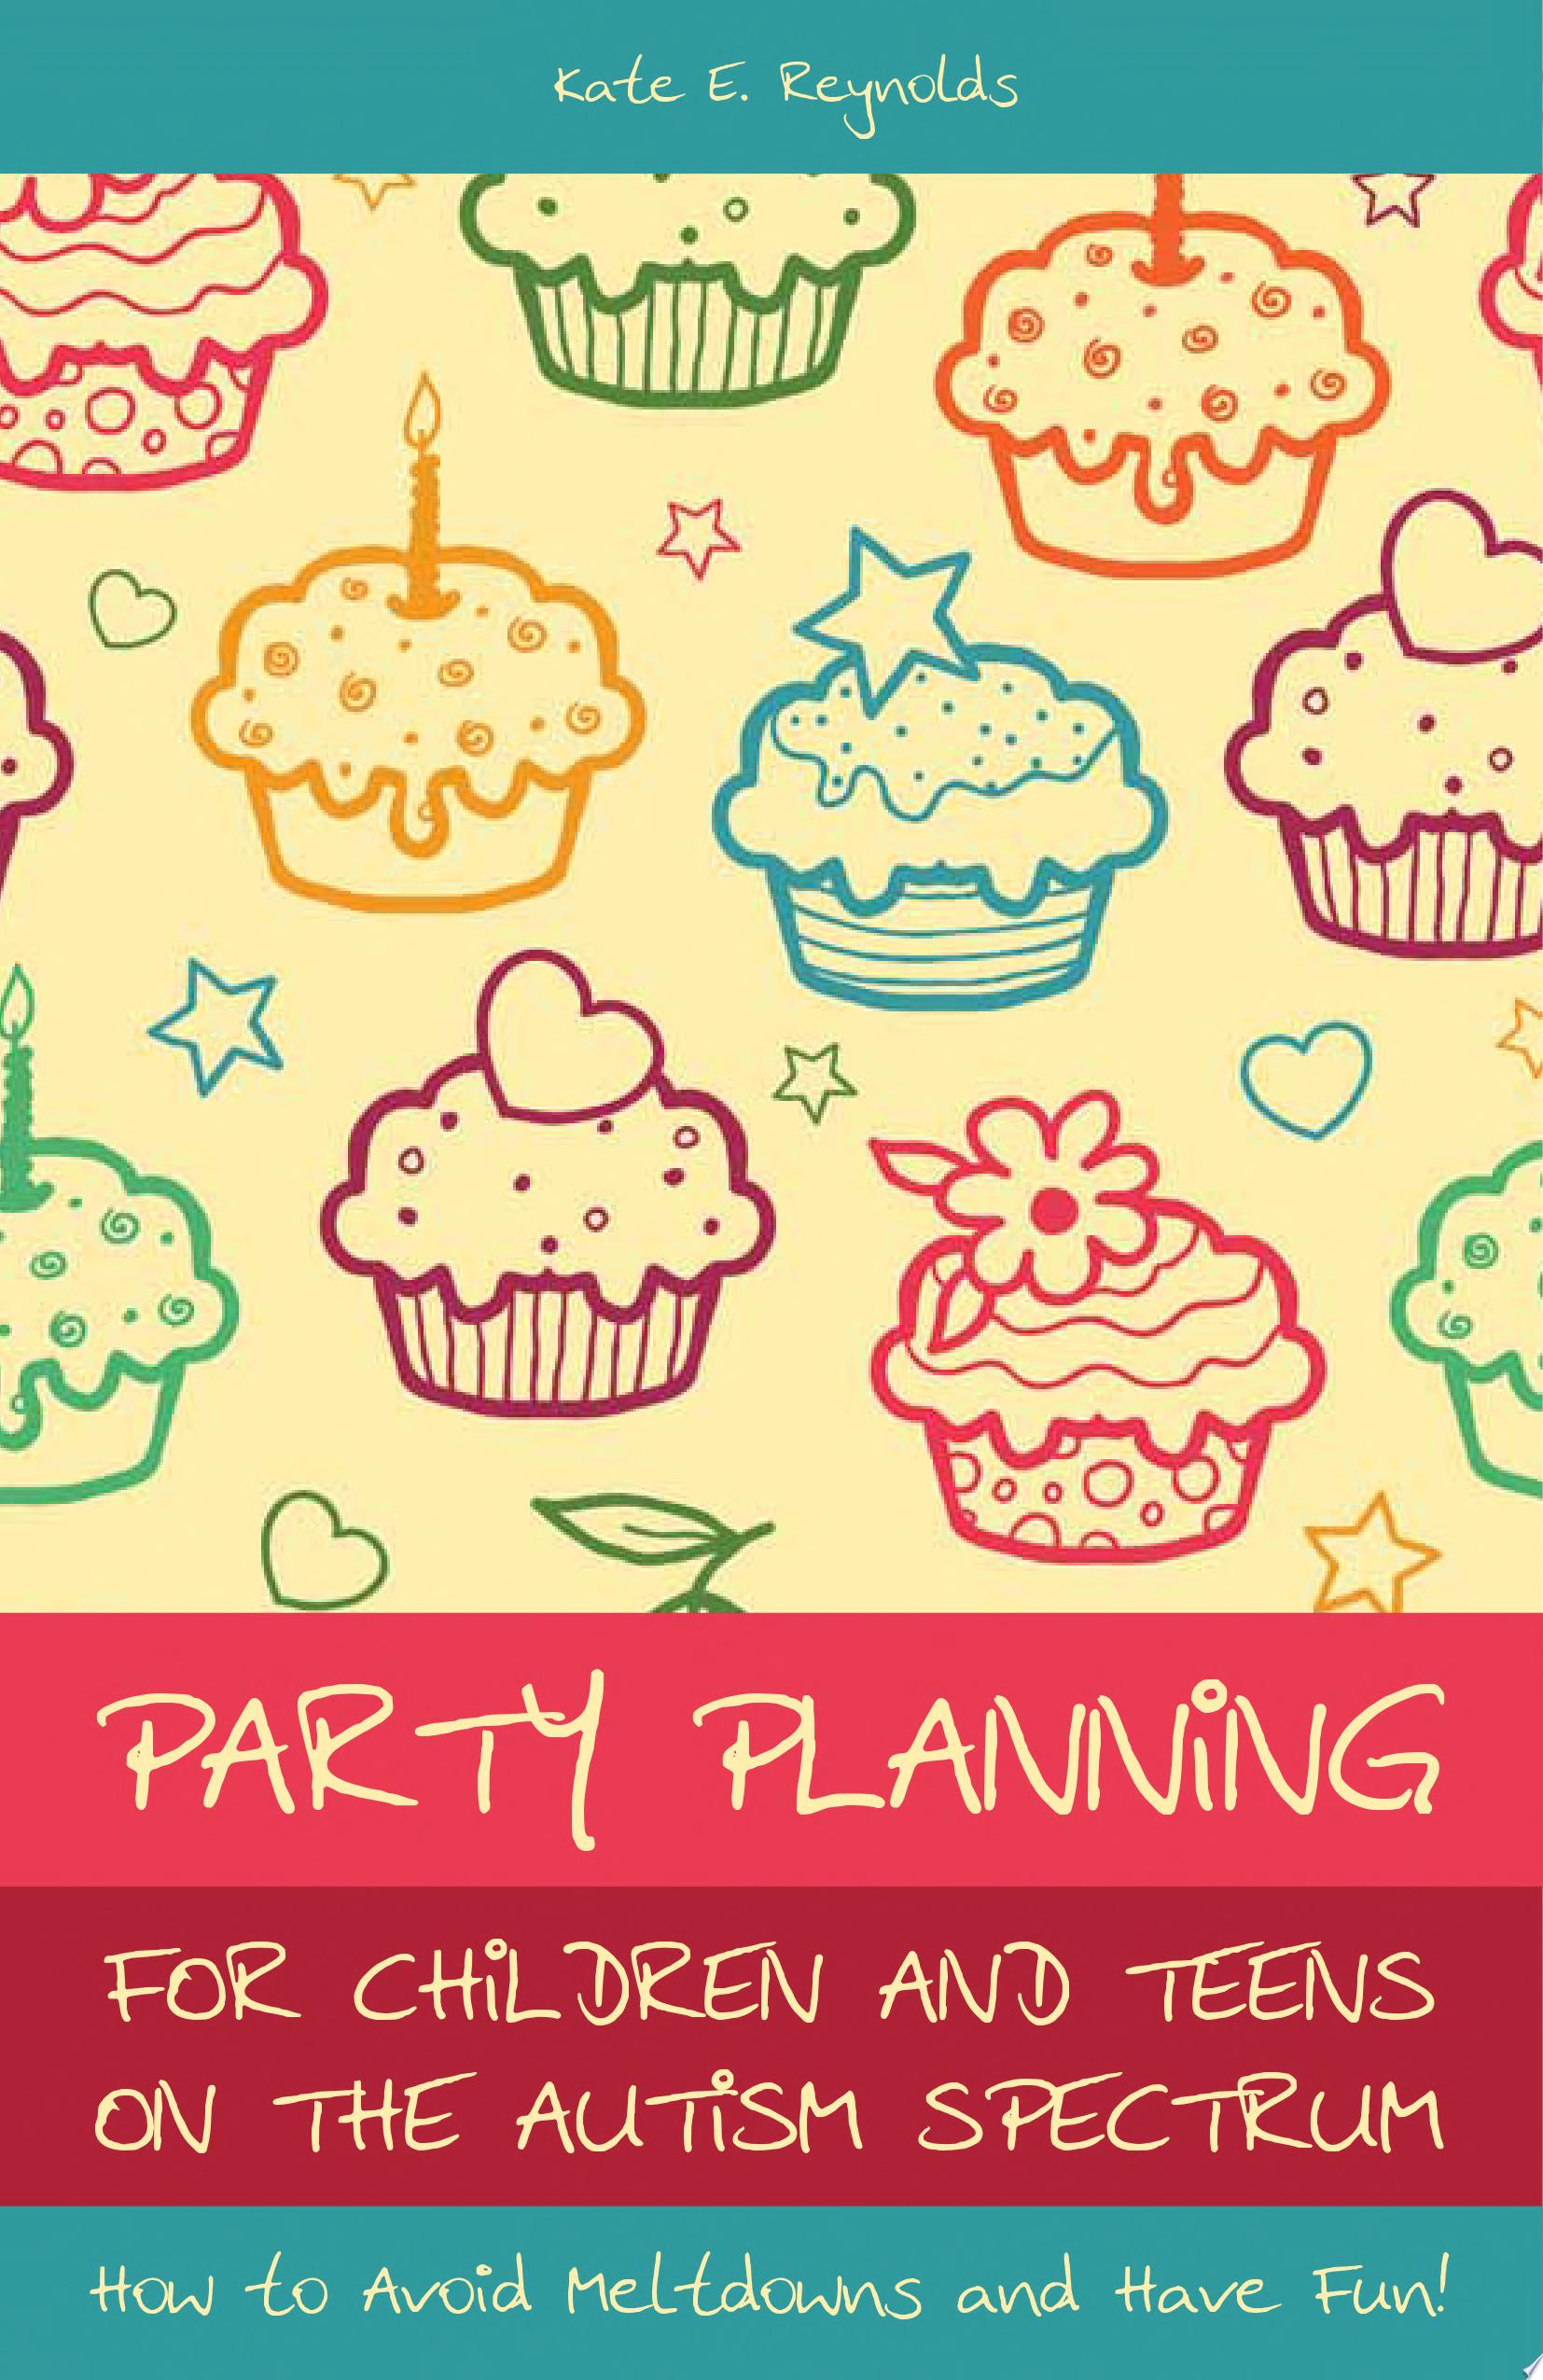 Image for "Party Planning for Children and Teens on the Autism Spectrum"